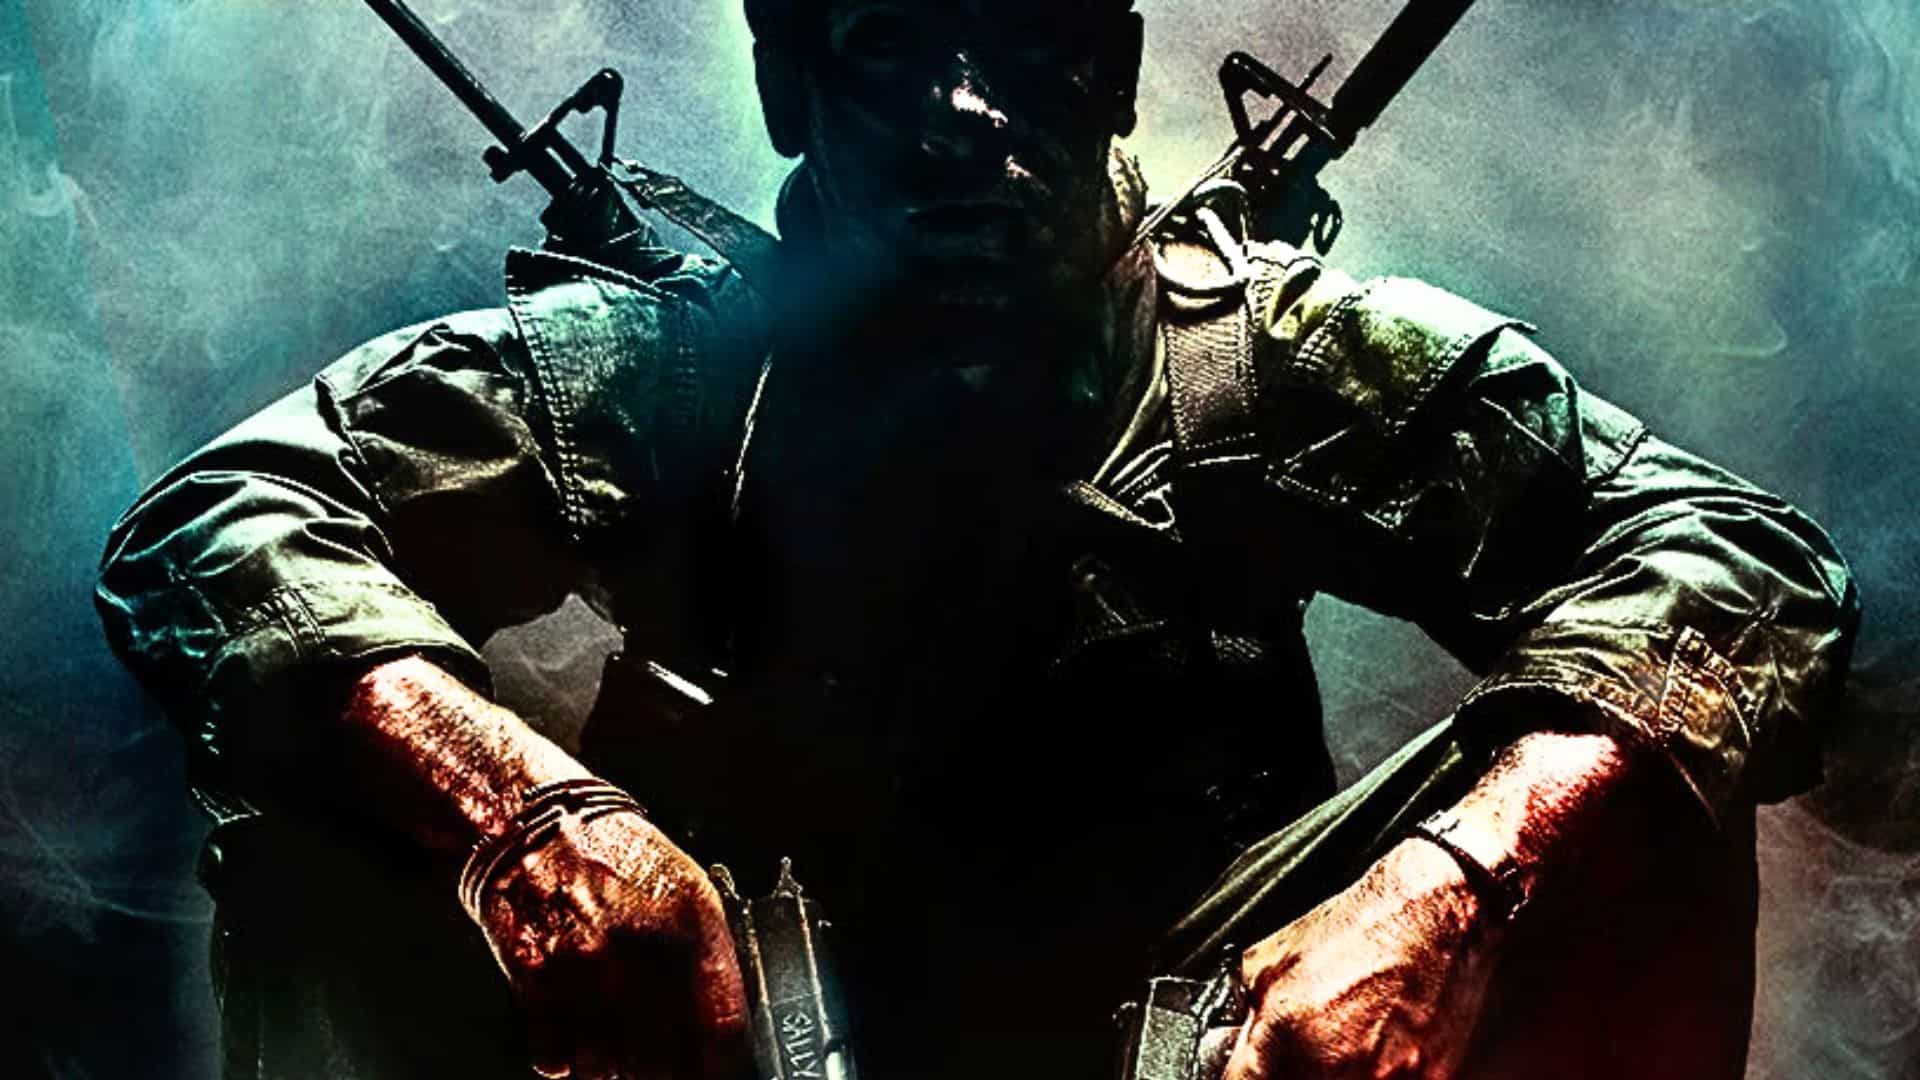 Call of Duty 2024 campaign is poised to be best ever according to leaks